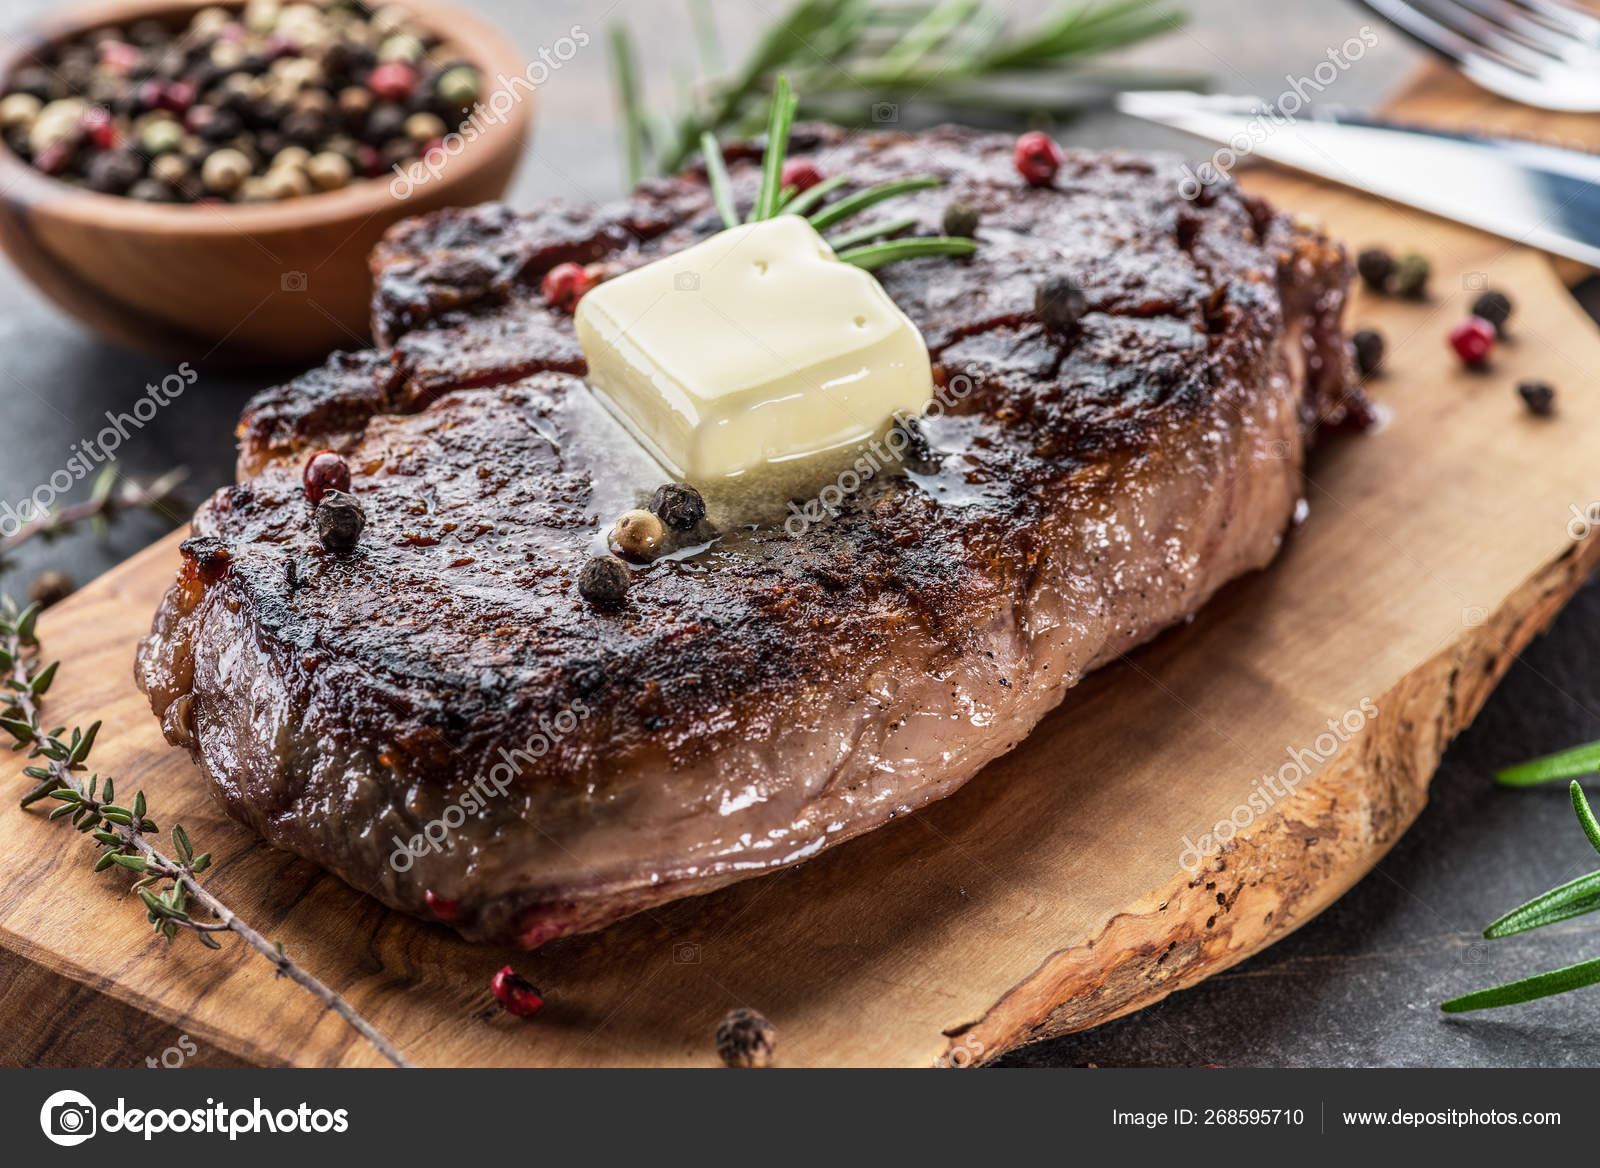 depositphotos 268595710 stock photo medium rare ribeye steak with1 The Best Bars and Restaurants in The New Orleans